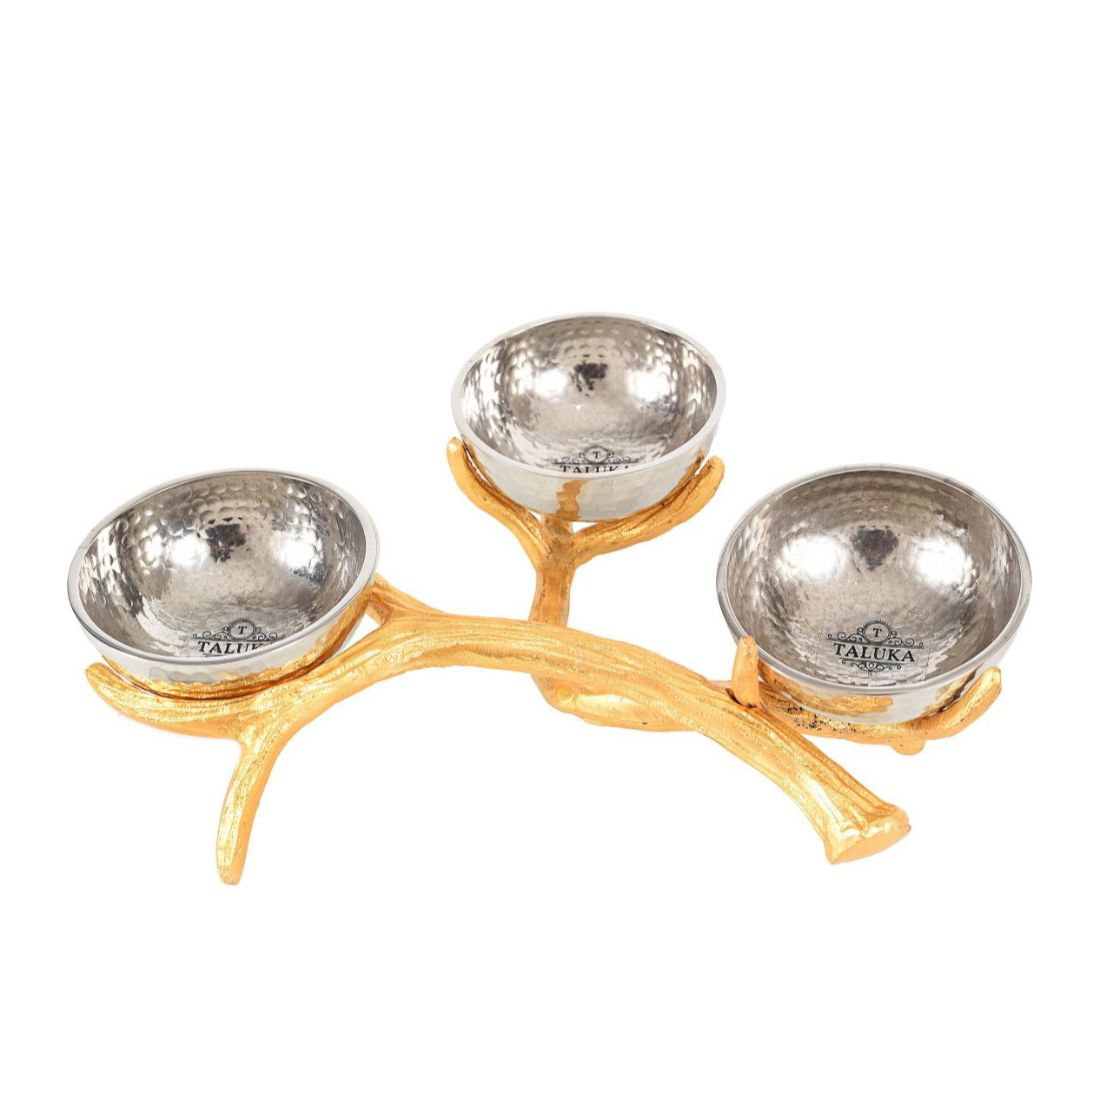 Stainless Steel Hammered Bowl Nickel Plating with Brass Stand 3 Pcs Set Serving ware Home Decor Handicraft Gifted Item Bowl